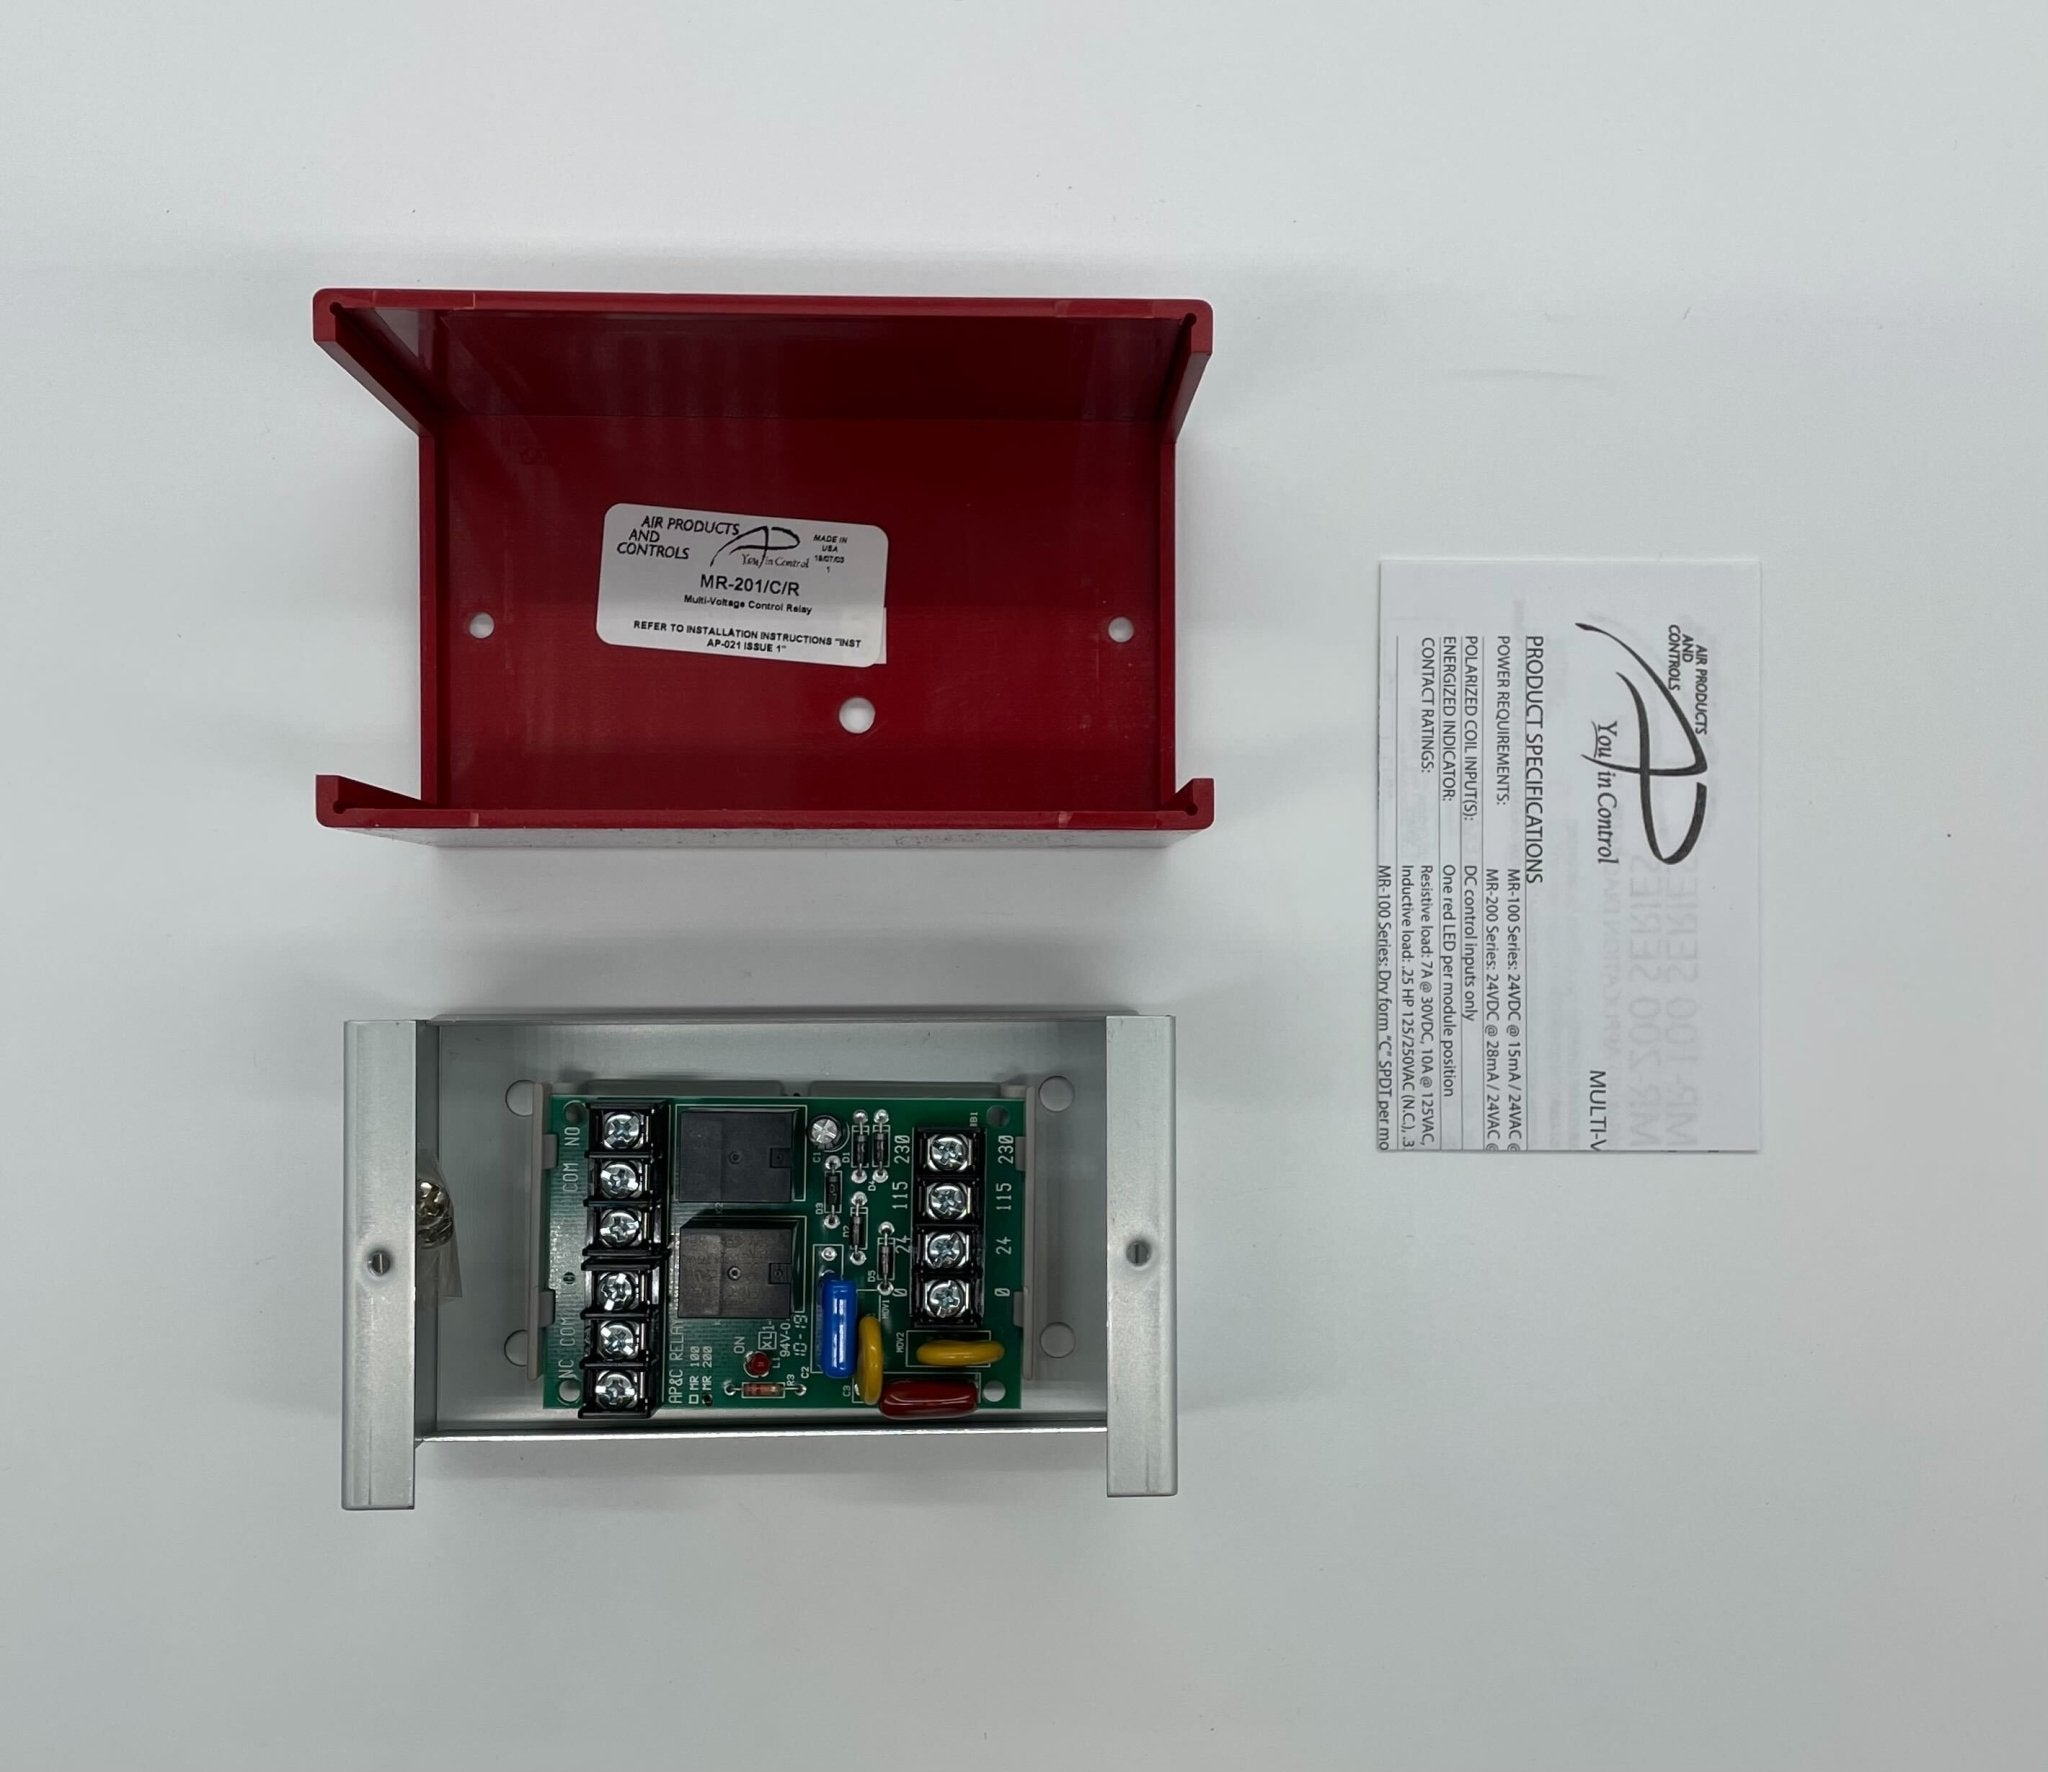 Space Age MR-201/C/R Electronics Mr-201/C/R - The Fire Alarm Supplier